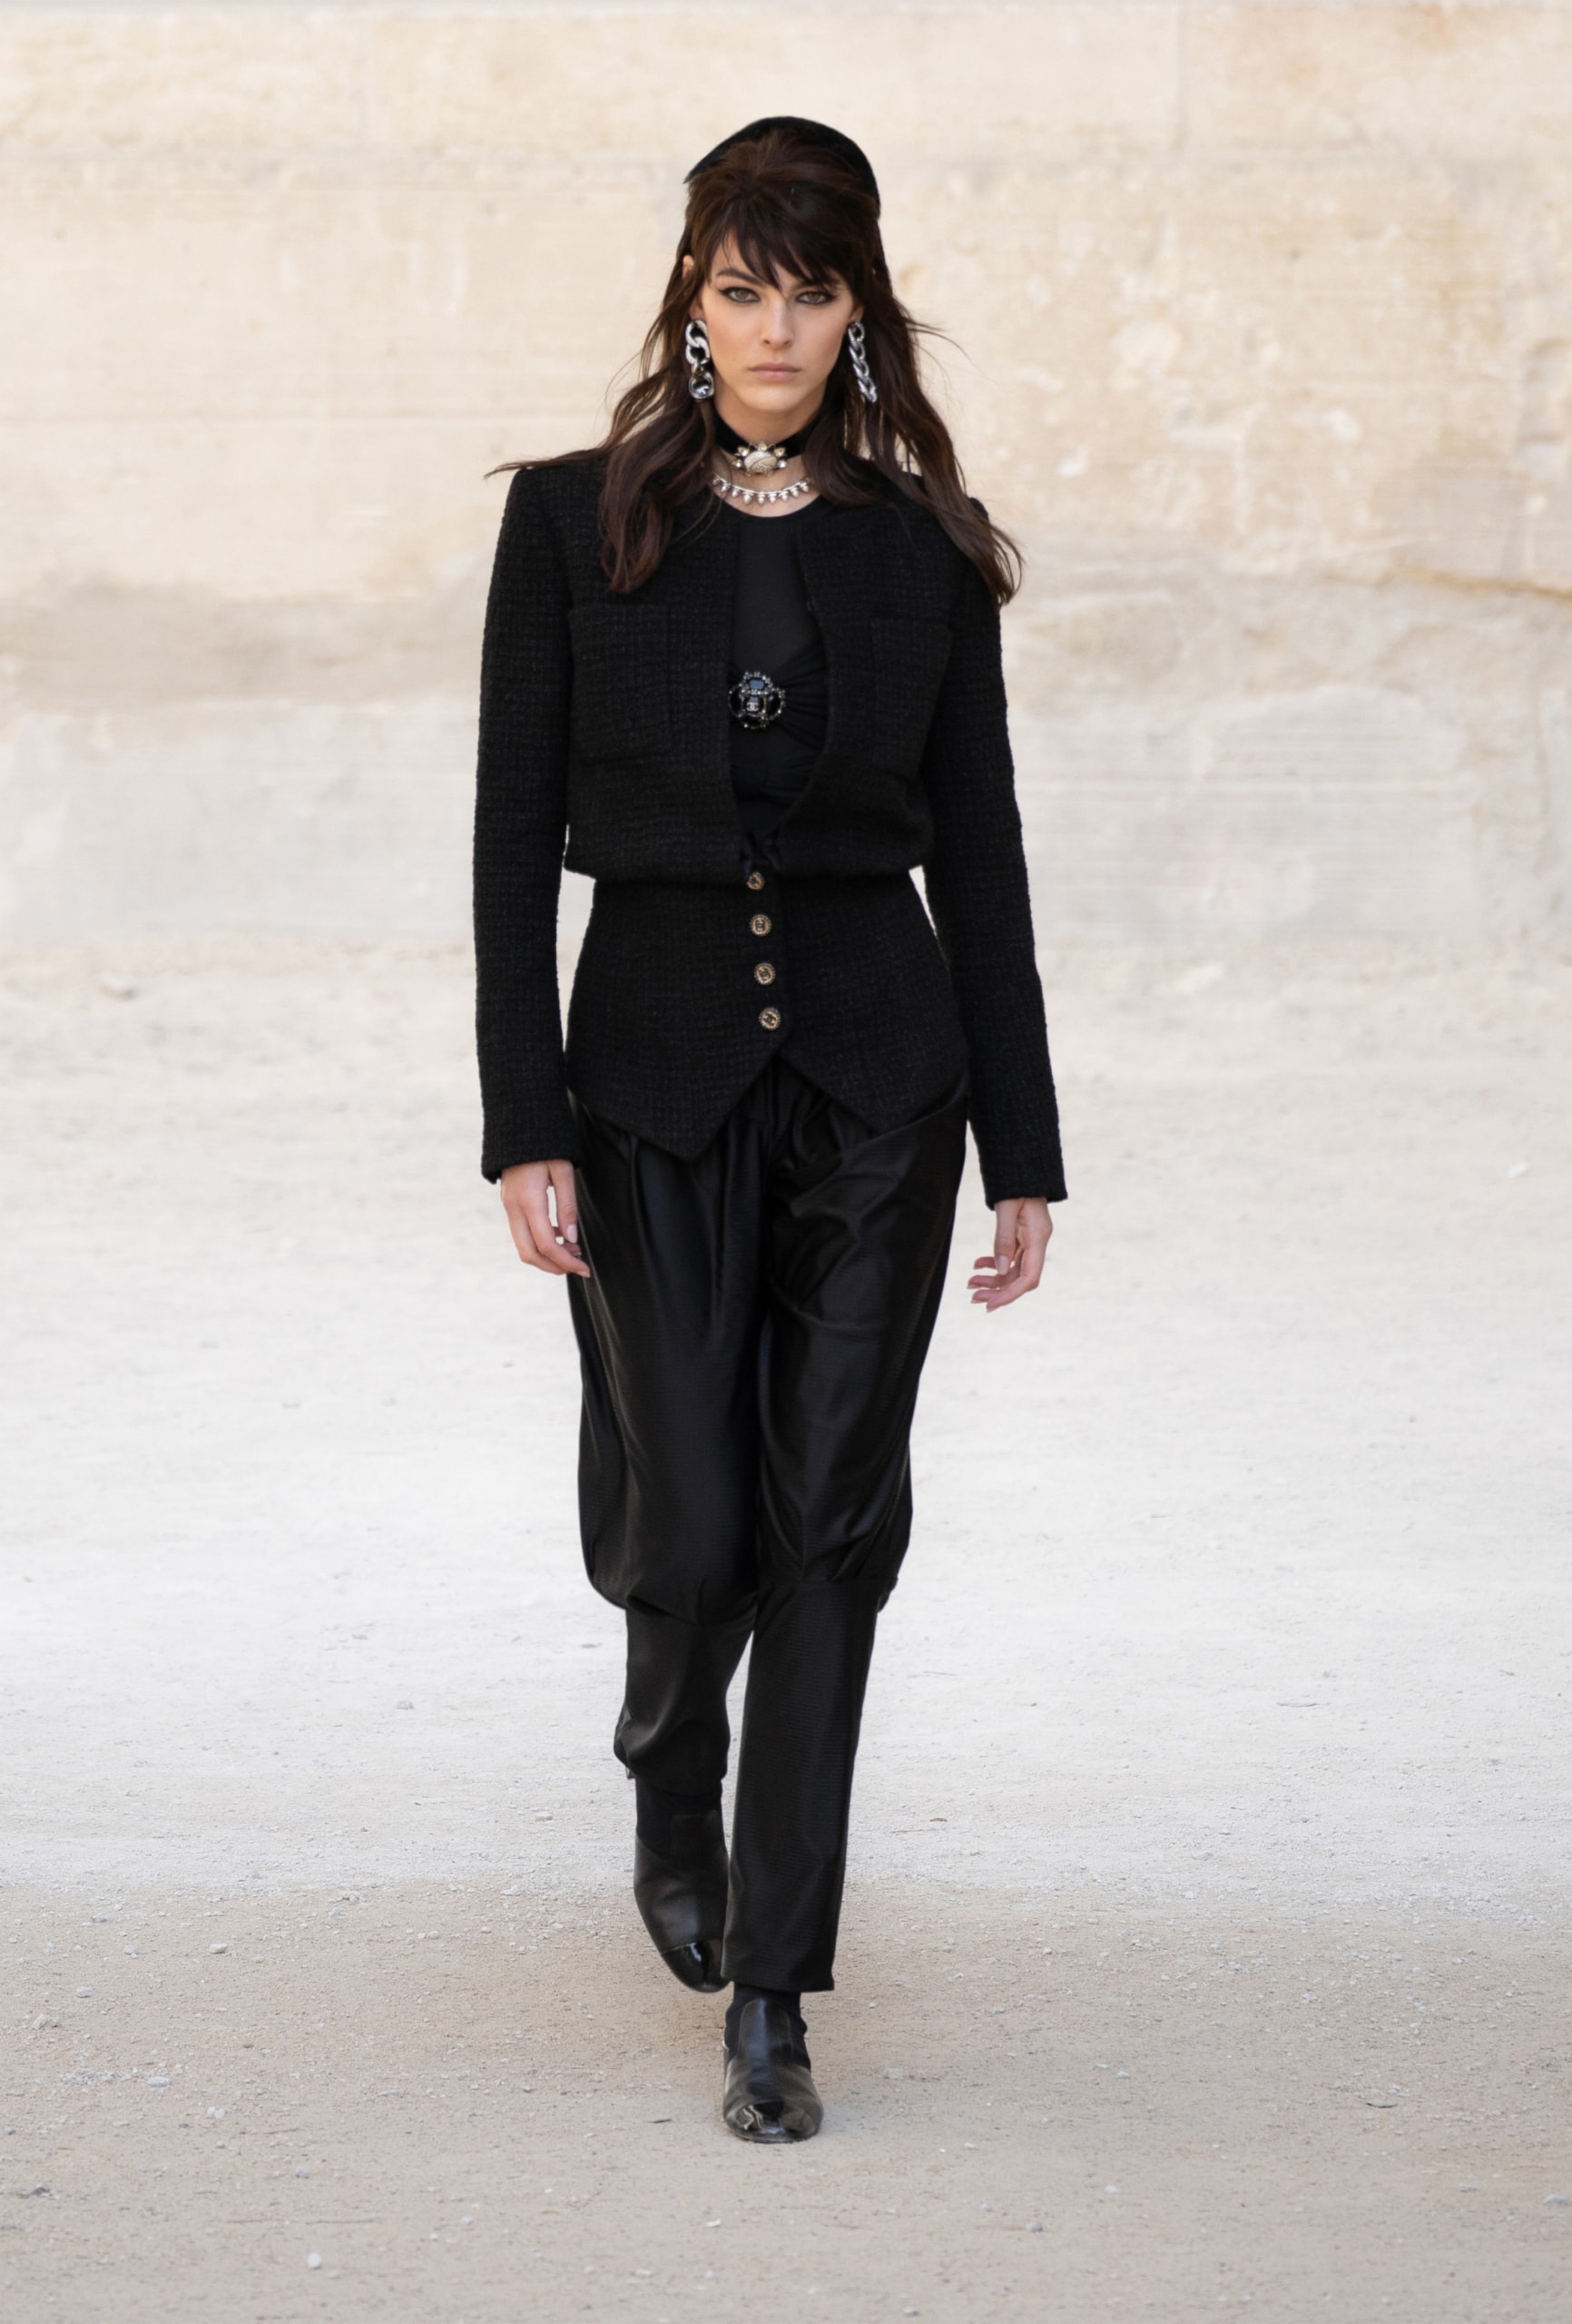 Chanel Presents Cruise 2021 Show in Provence